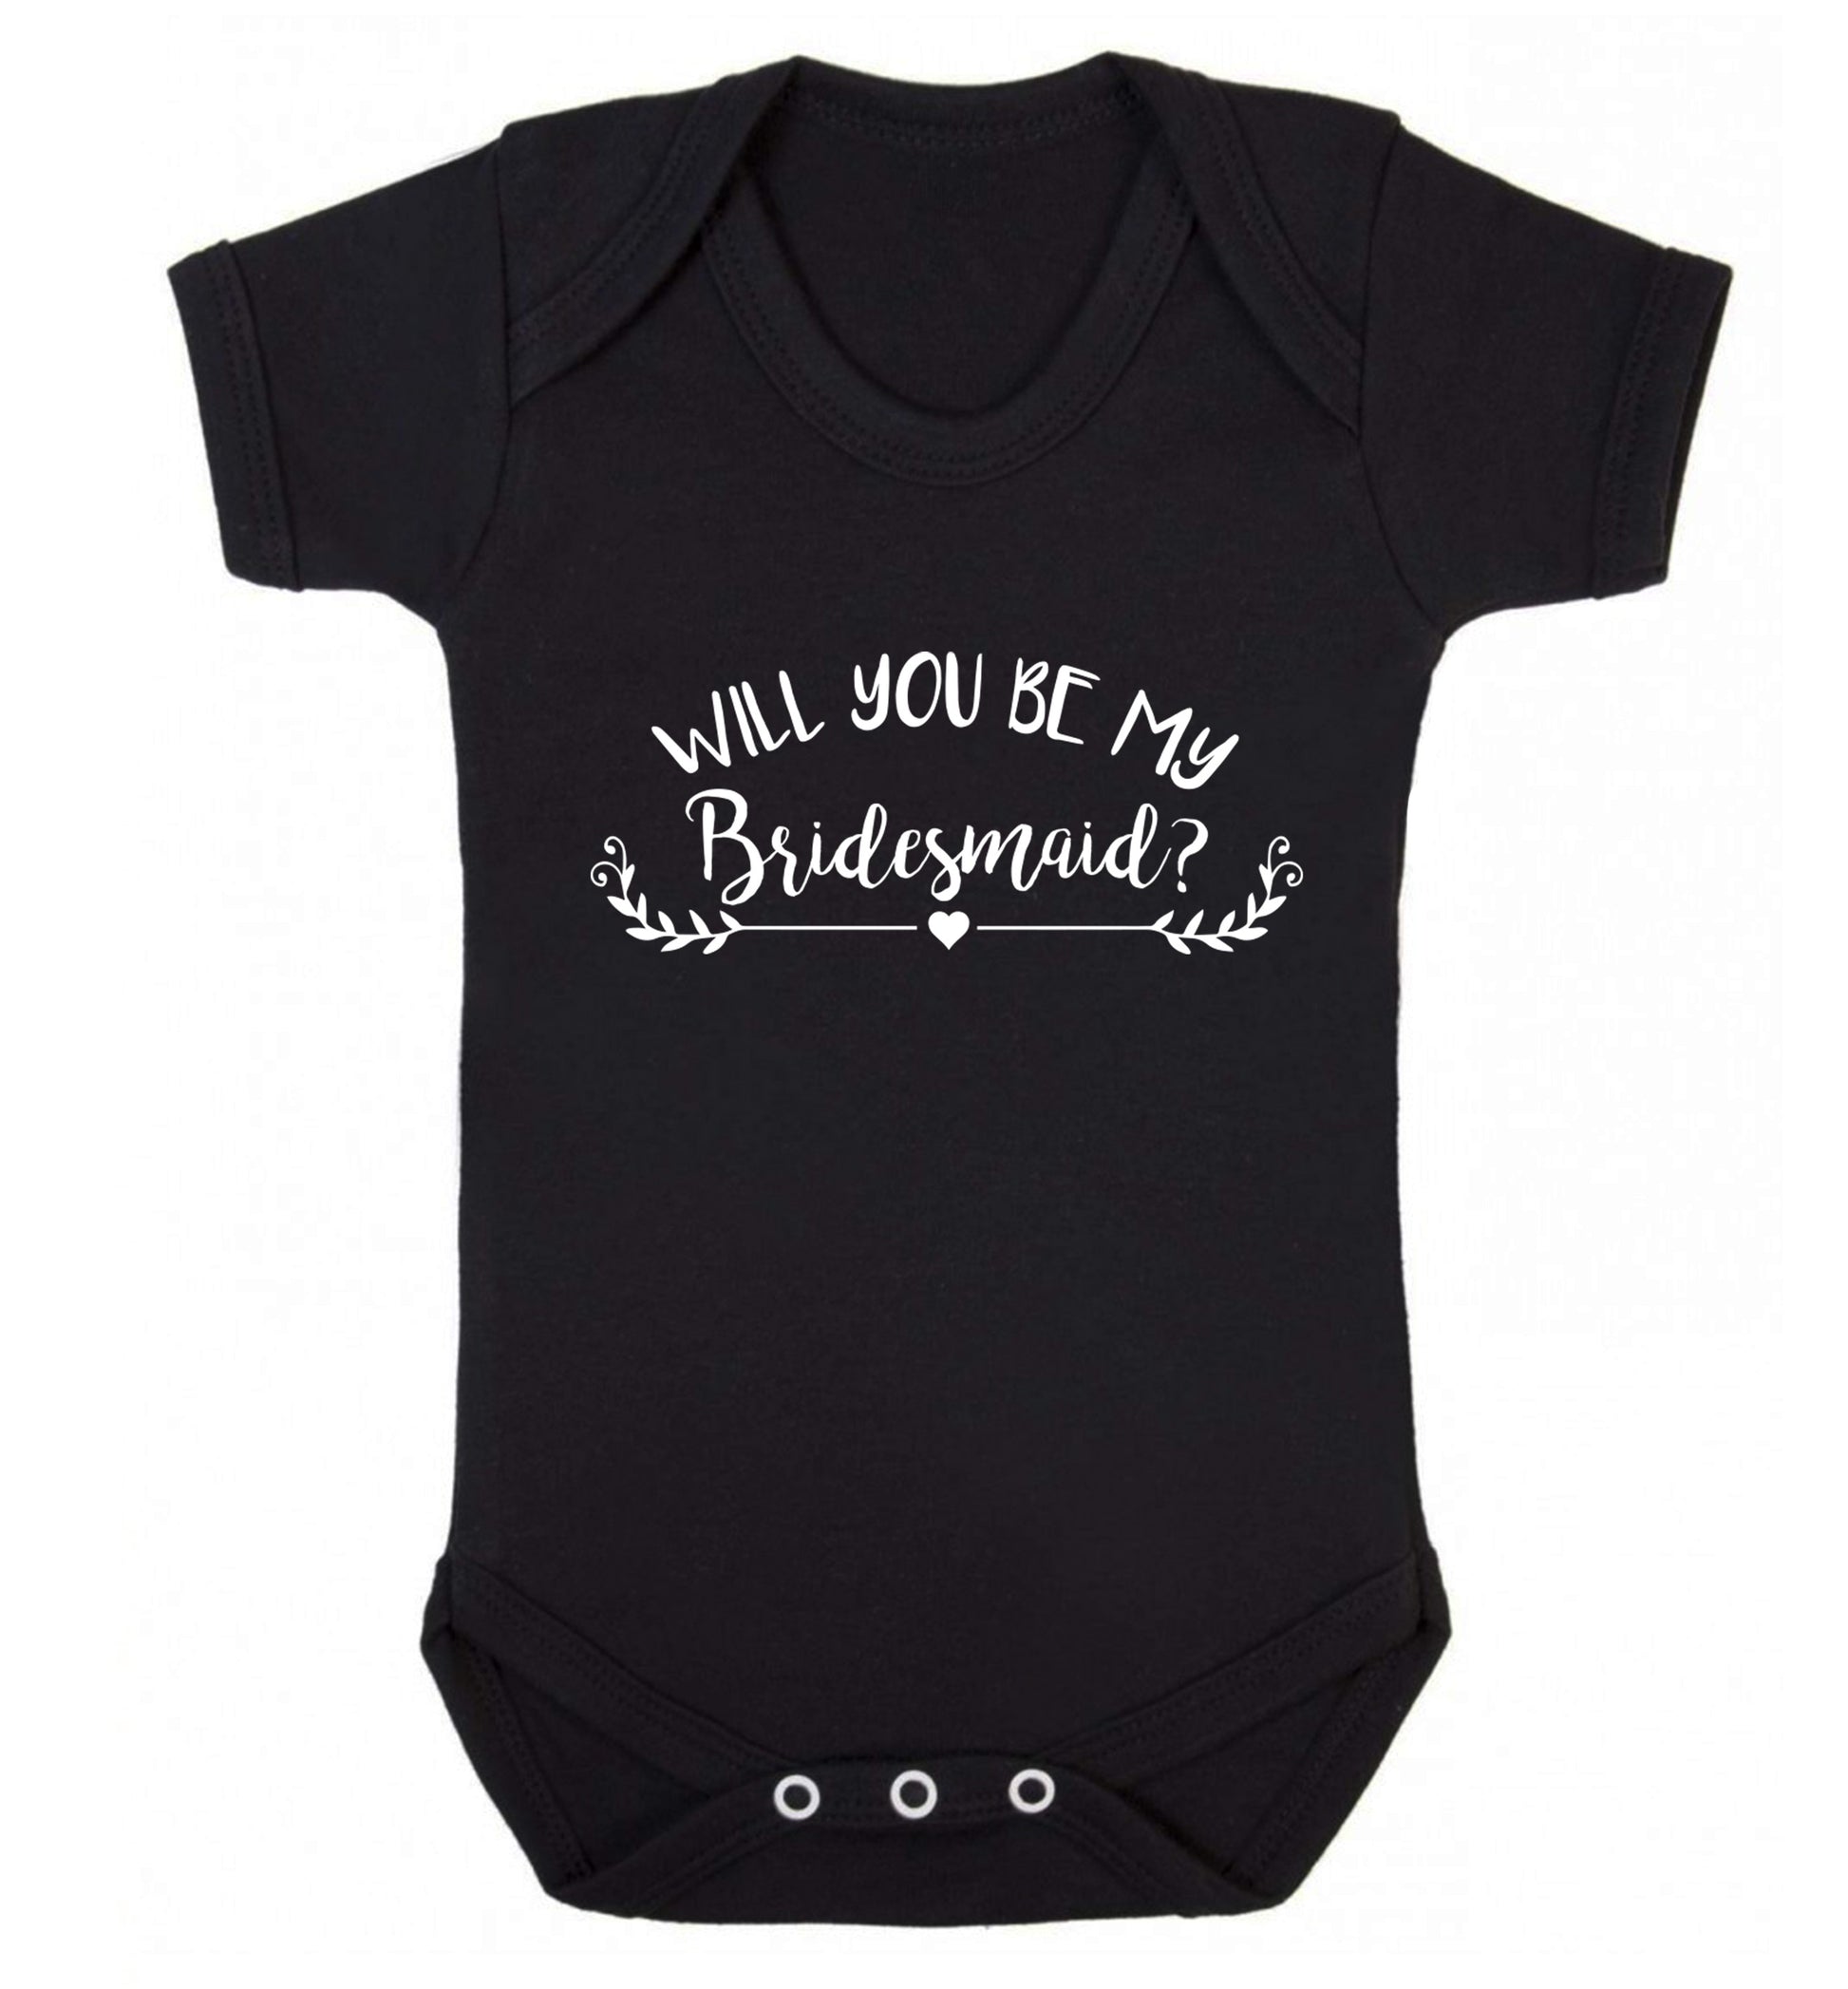 Will you be my bridesmaid? Baby Vest black 18-24 months